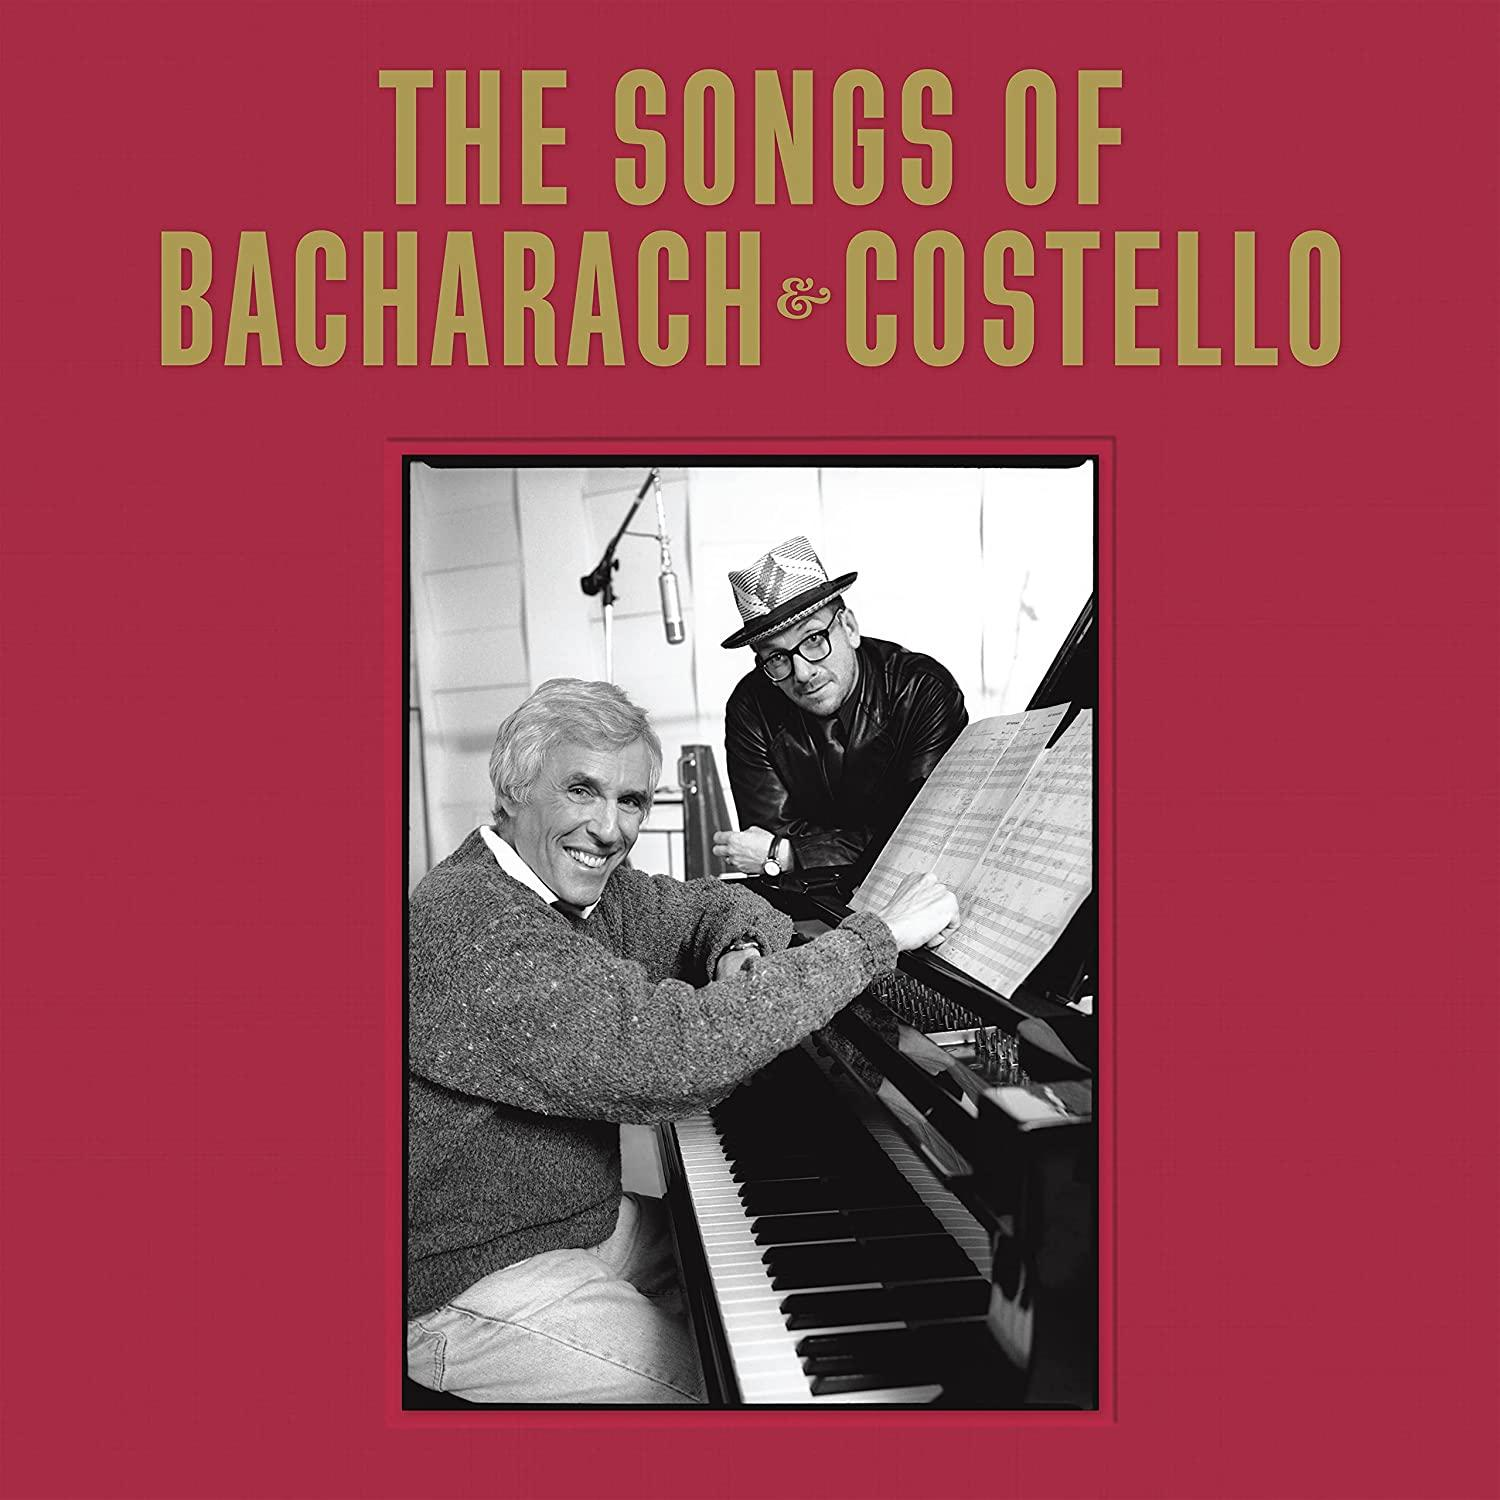 Burt The Elvis - - Of Costello Songs (Vinyl) And & Bacharach Bacharach Costello